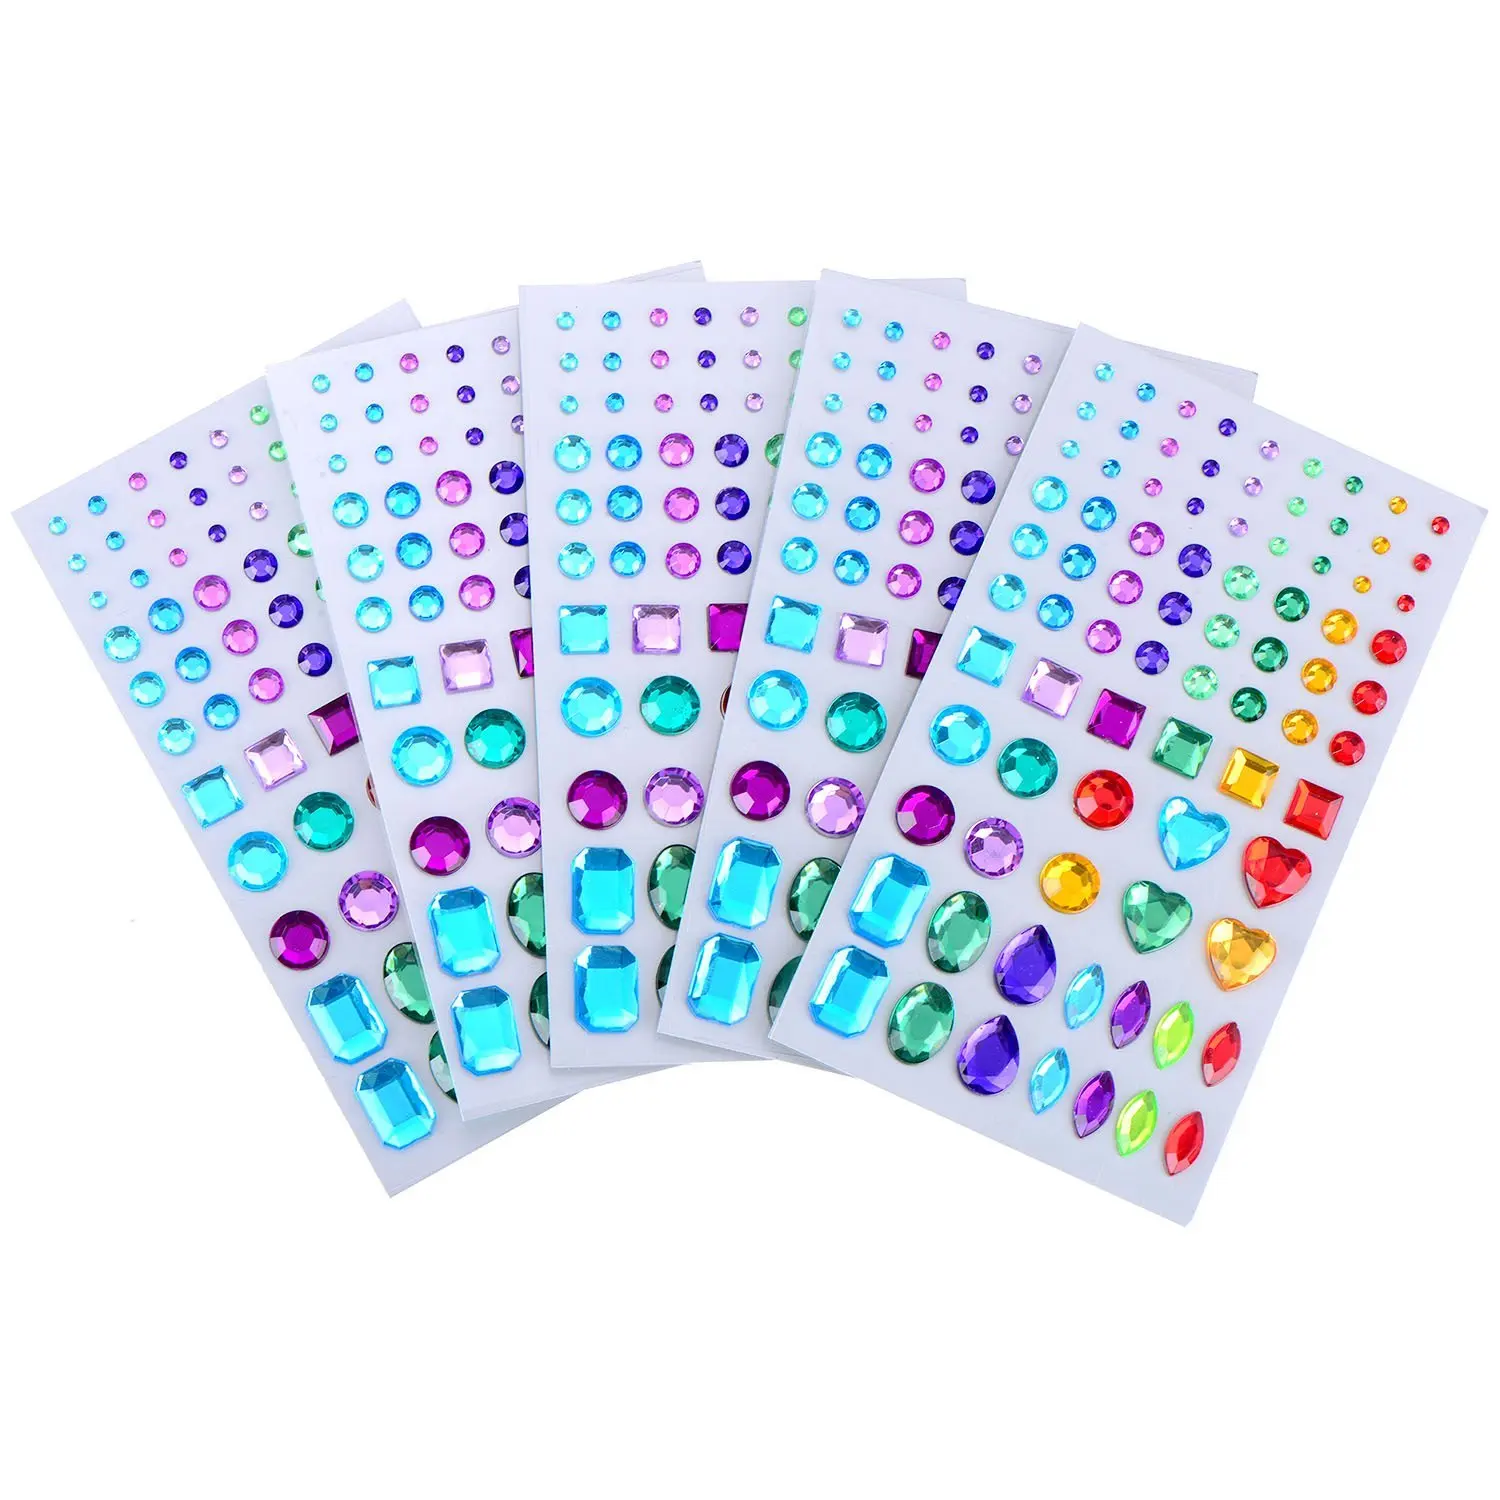 

Self-adhesive Rhinestone Sticker Bling Craft Jewels Crystal Gem Stickers, Assorted Size, 5 Sheets (Multicolor